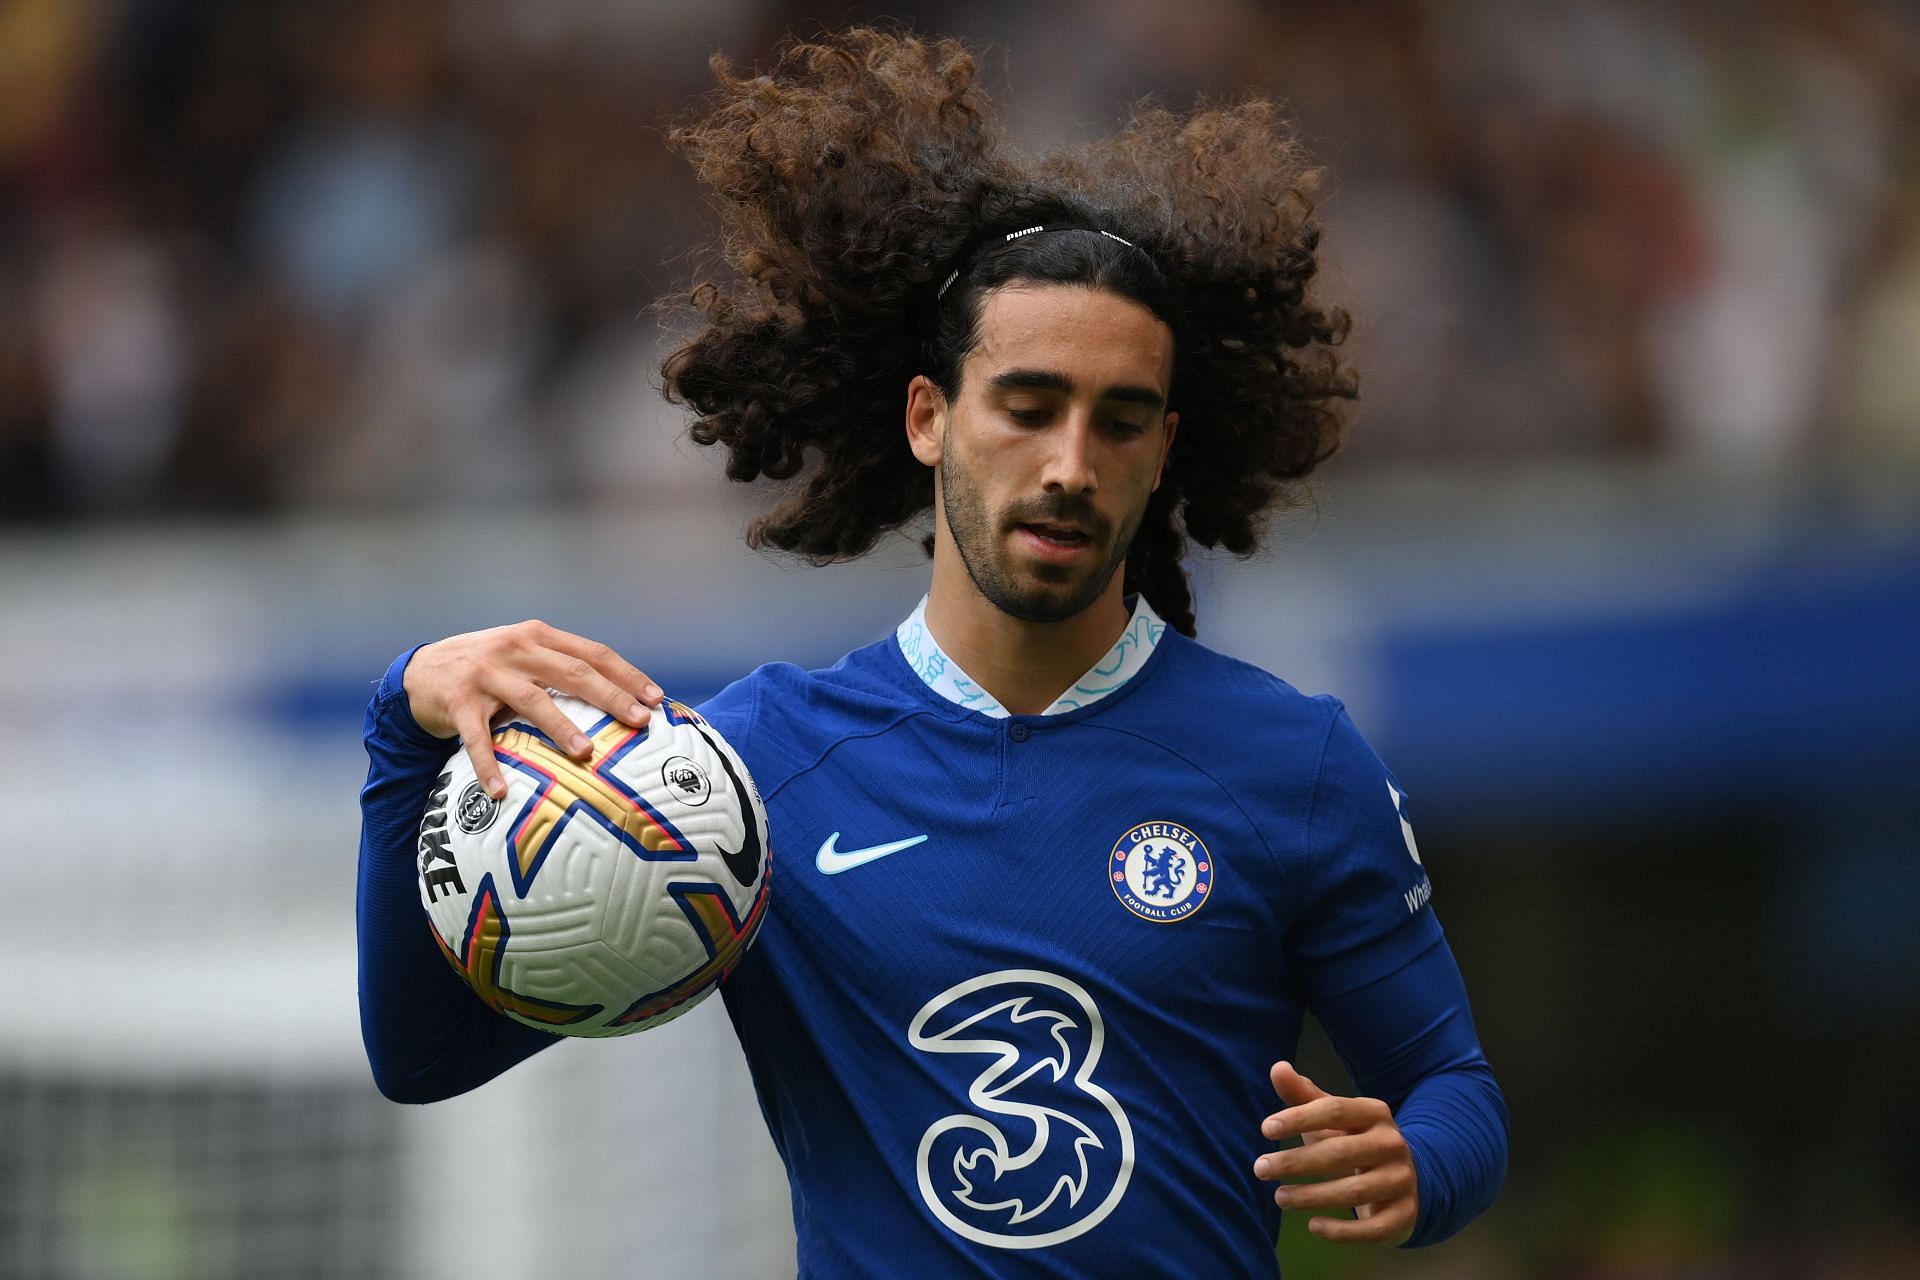 Cucurella joined Chelsea from Brighton this summer